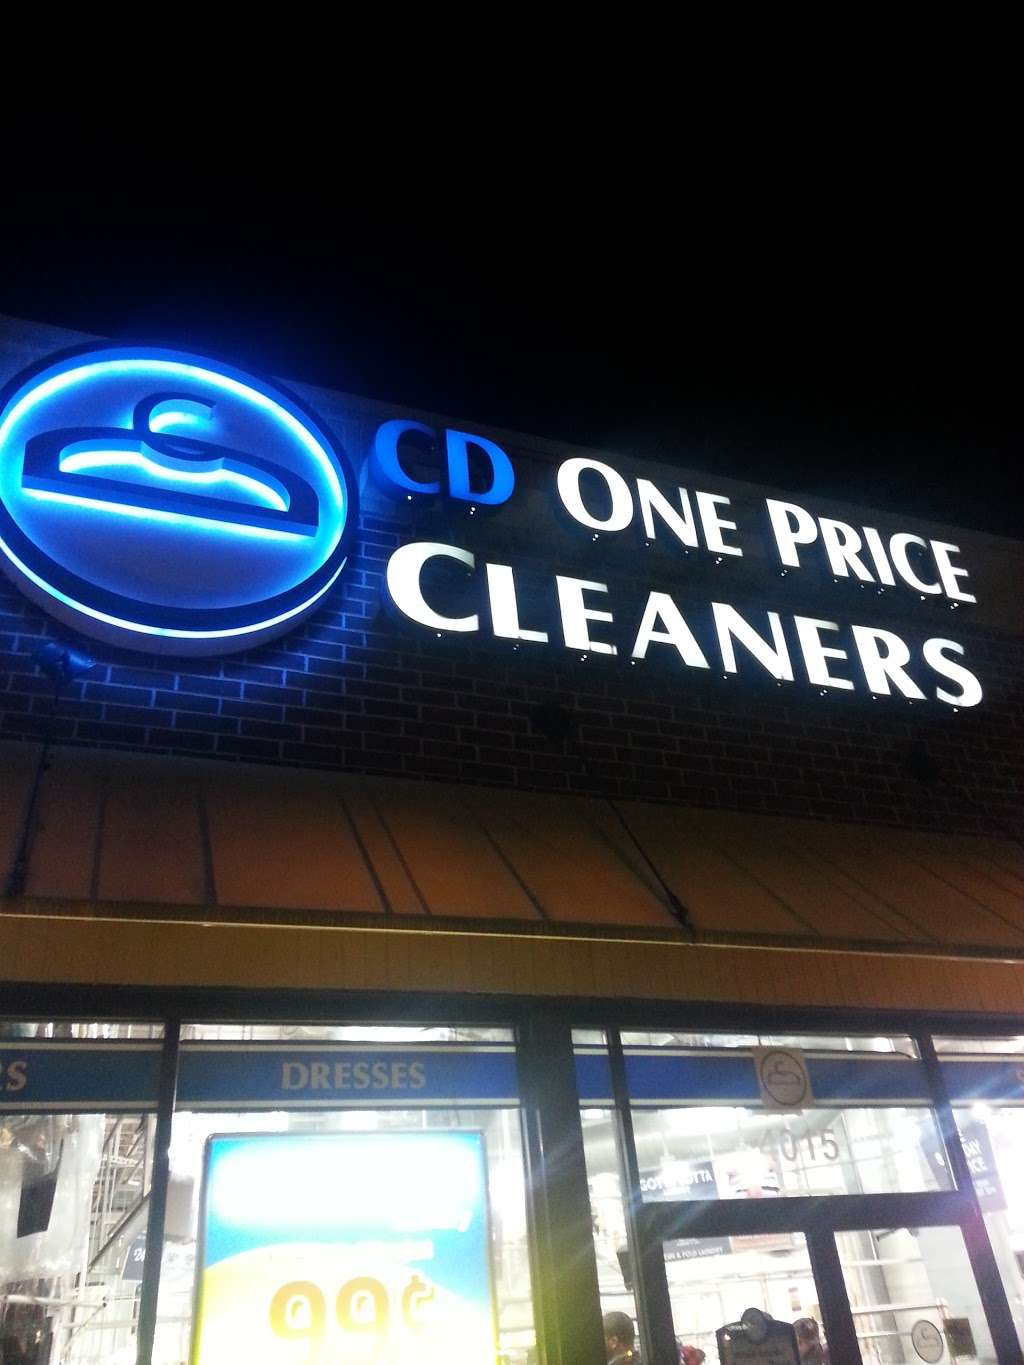 CD One Price Cleaners | 4015 167th St, Country Club Hills, IL 60478 | Phone: (708) 647-1066